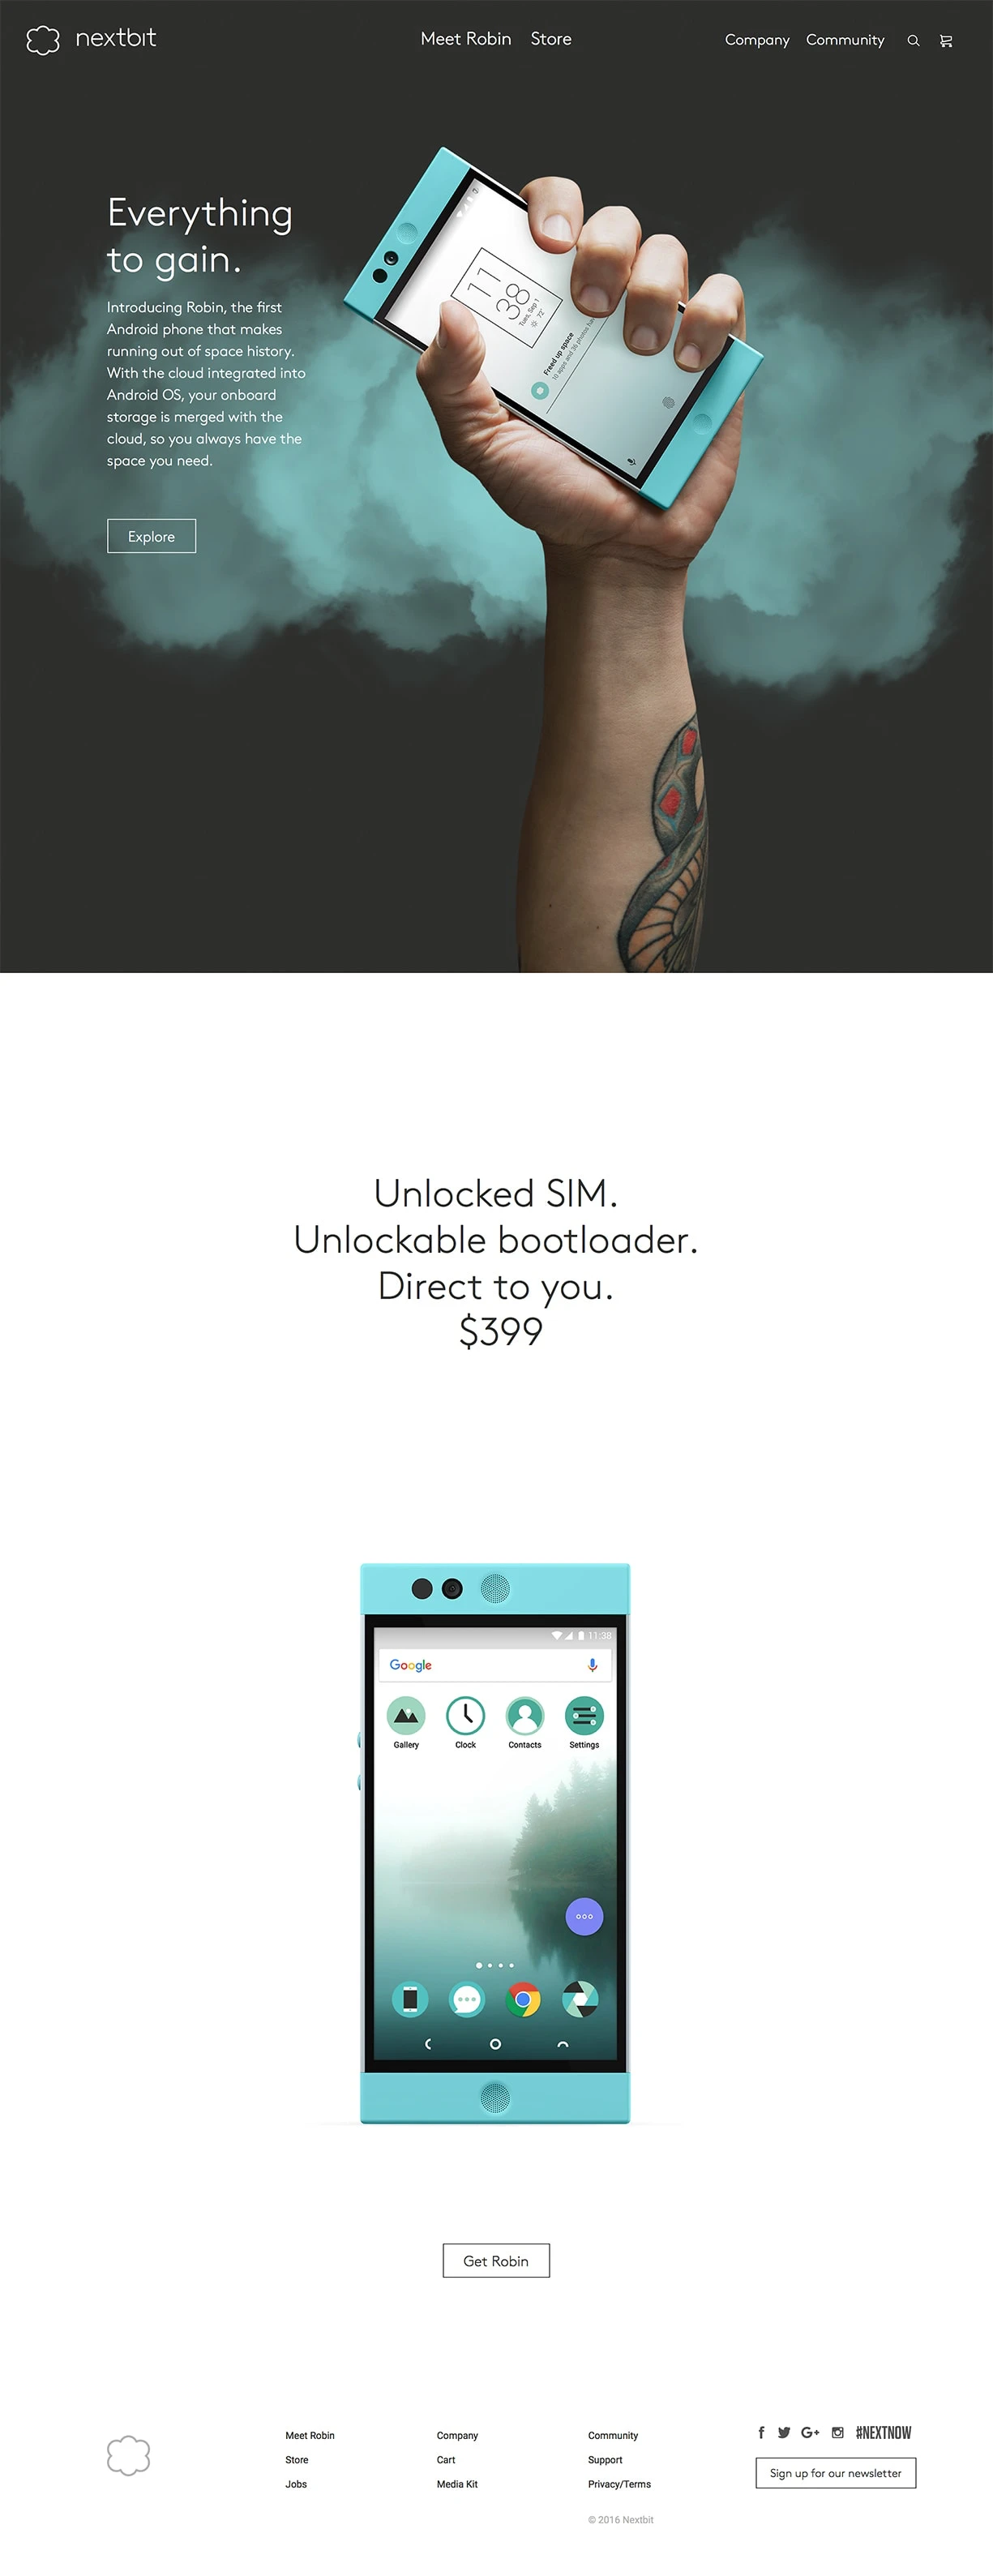 Nextbit Landing Page Example: Everything to gain. Introducing Robin, the first Android phone that makes running out of space history. With the cloud integrated into Android OS, your onboard storage is merged with the cloud, so you always have the space you need.